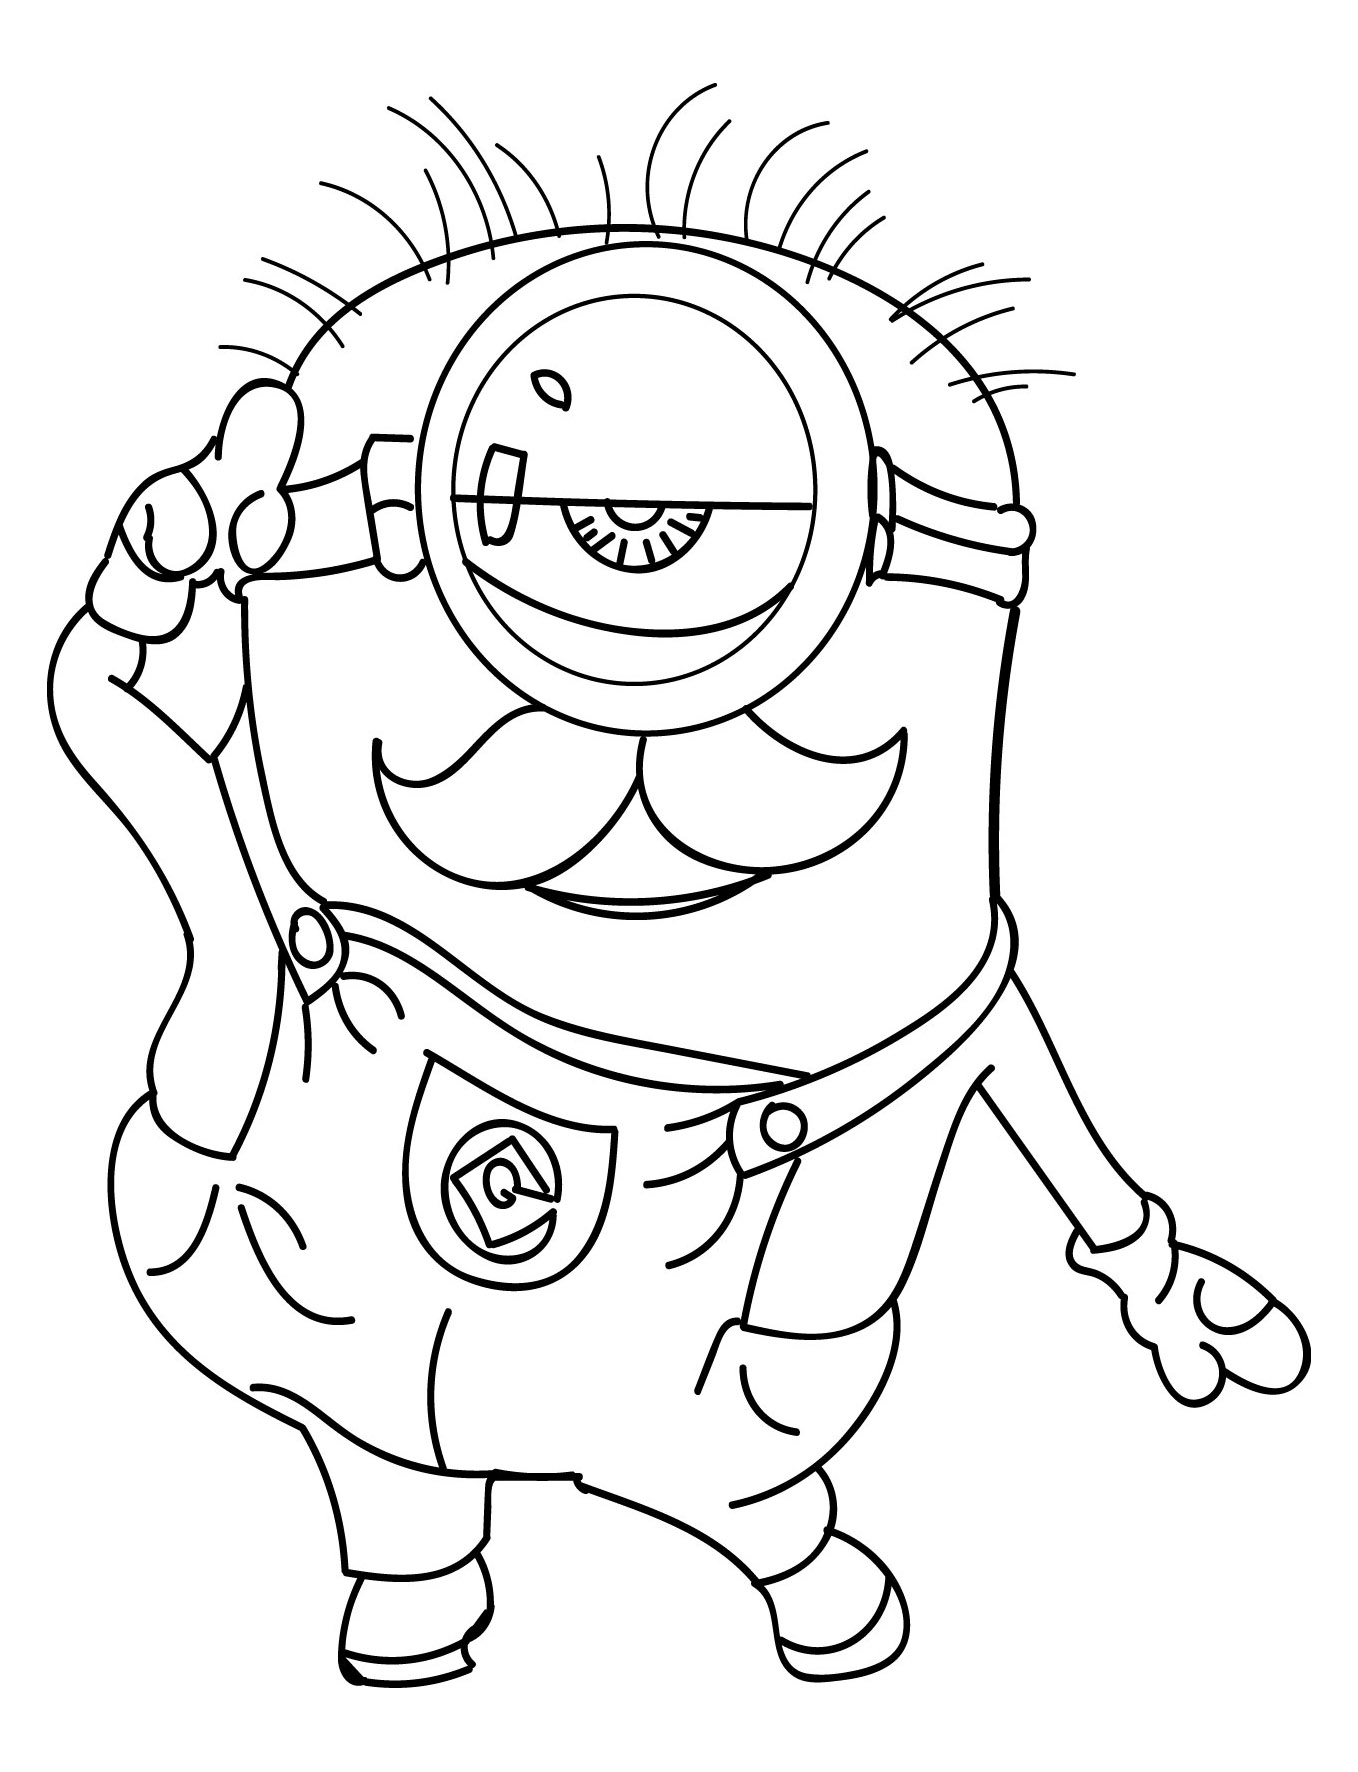 Minions to color for kids   Minions Kids Coloring Pages